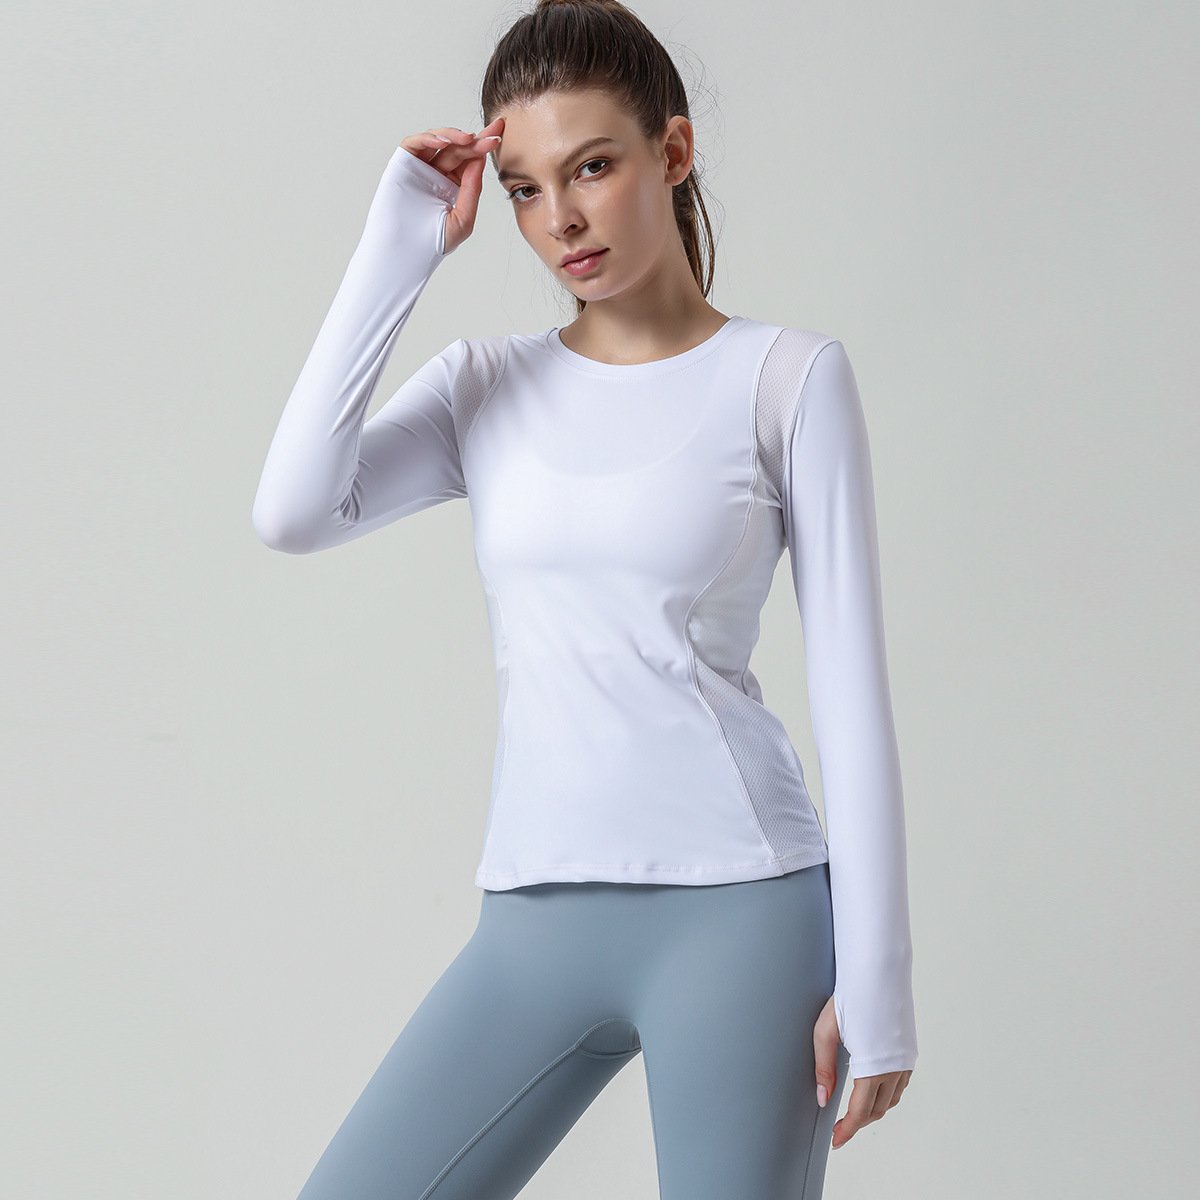 Workout Shirts & Blouses & Tops for Women